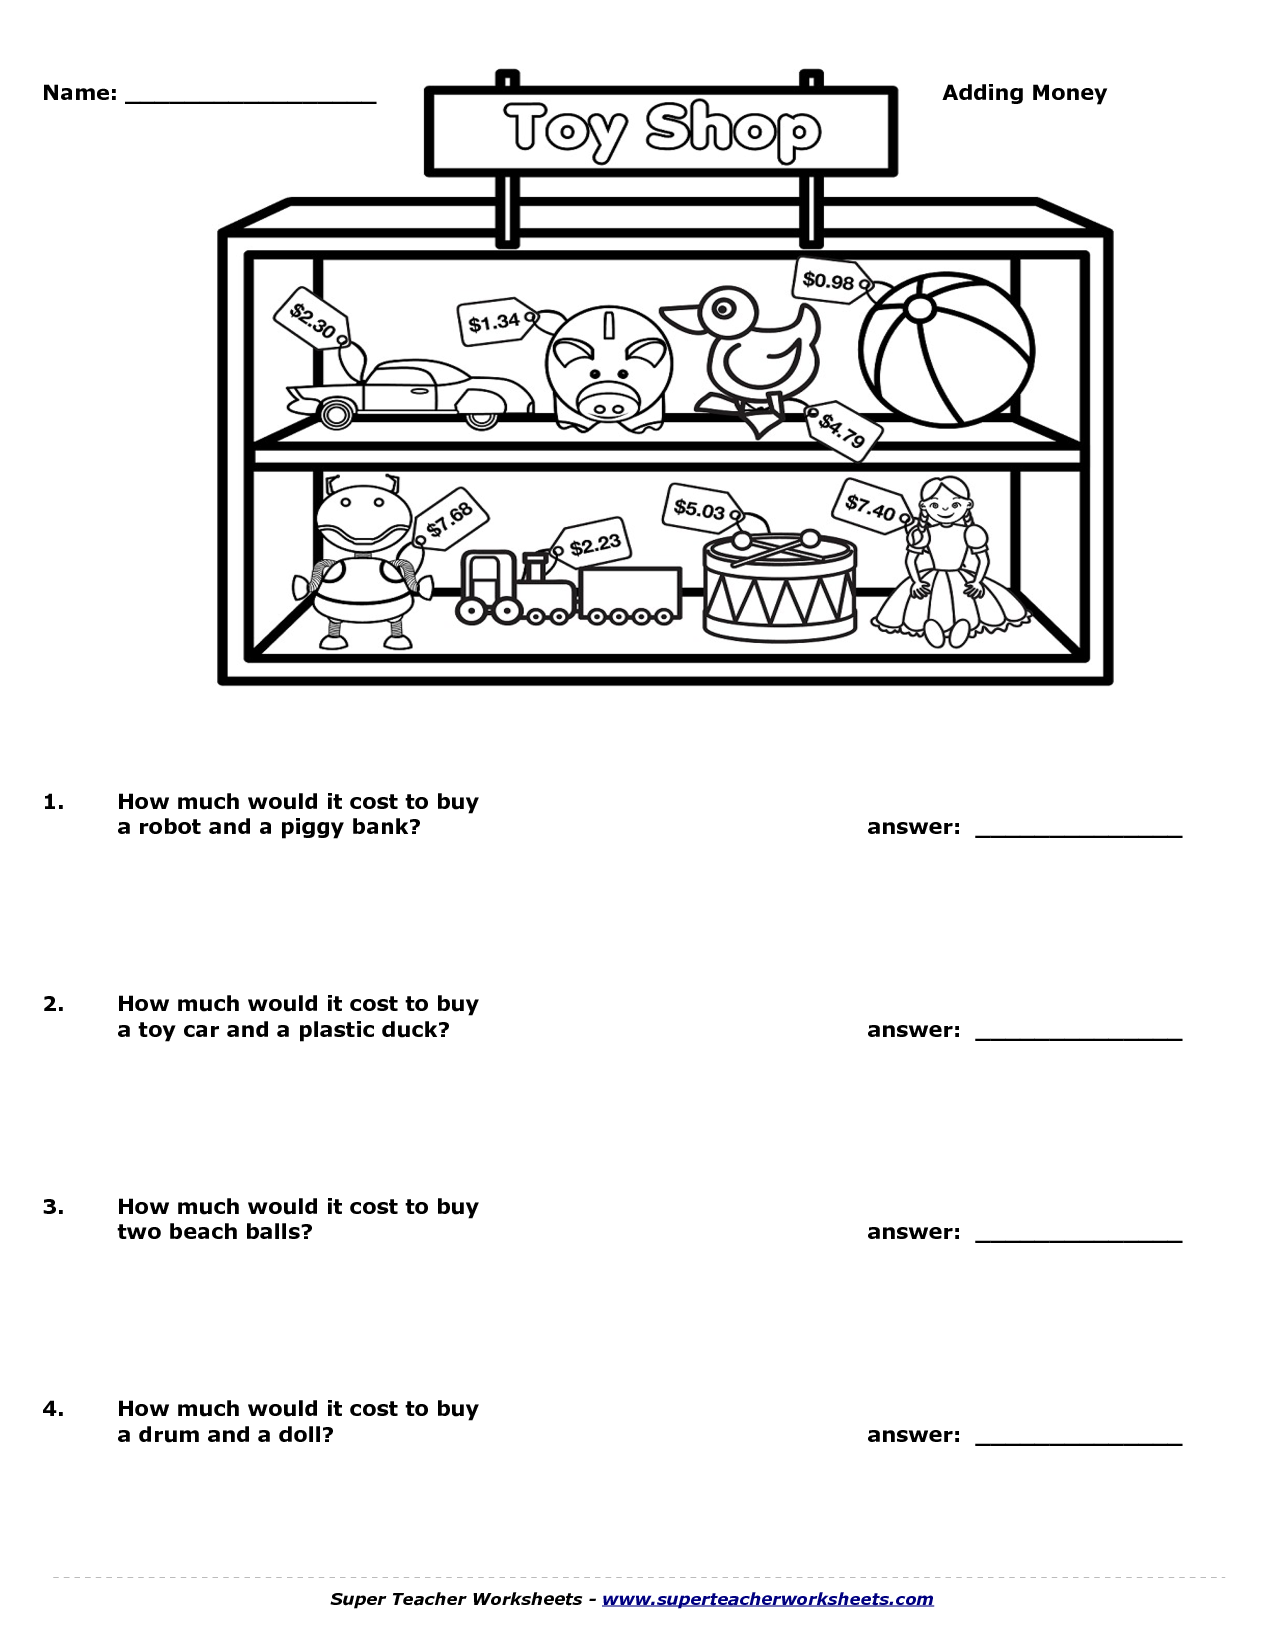 13 Best Images of Super Teacher Worksheets Math Answers ...